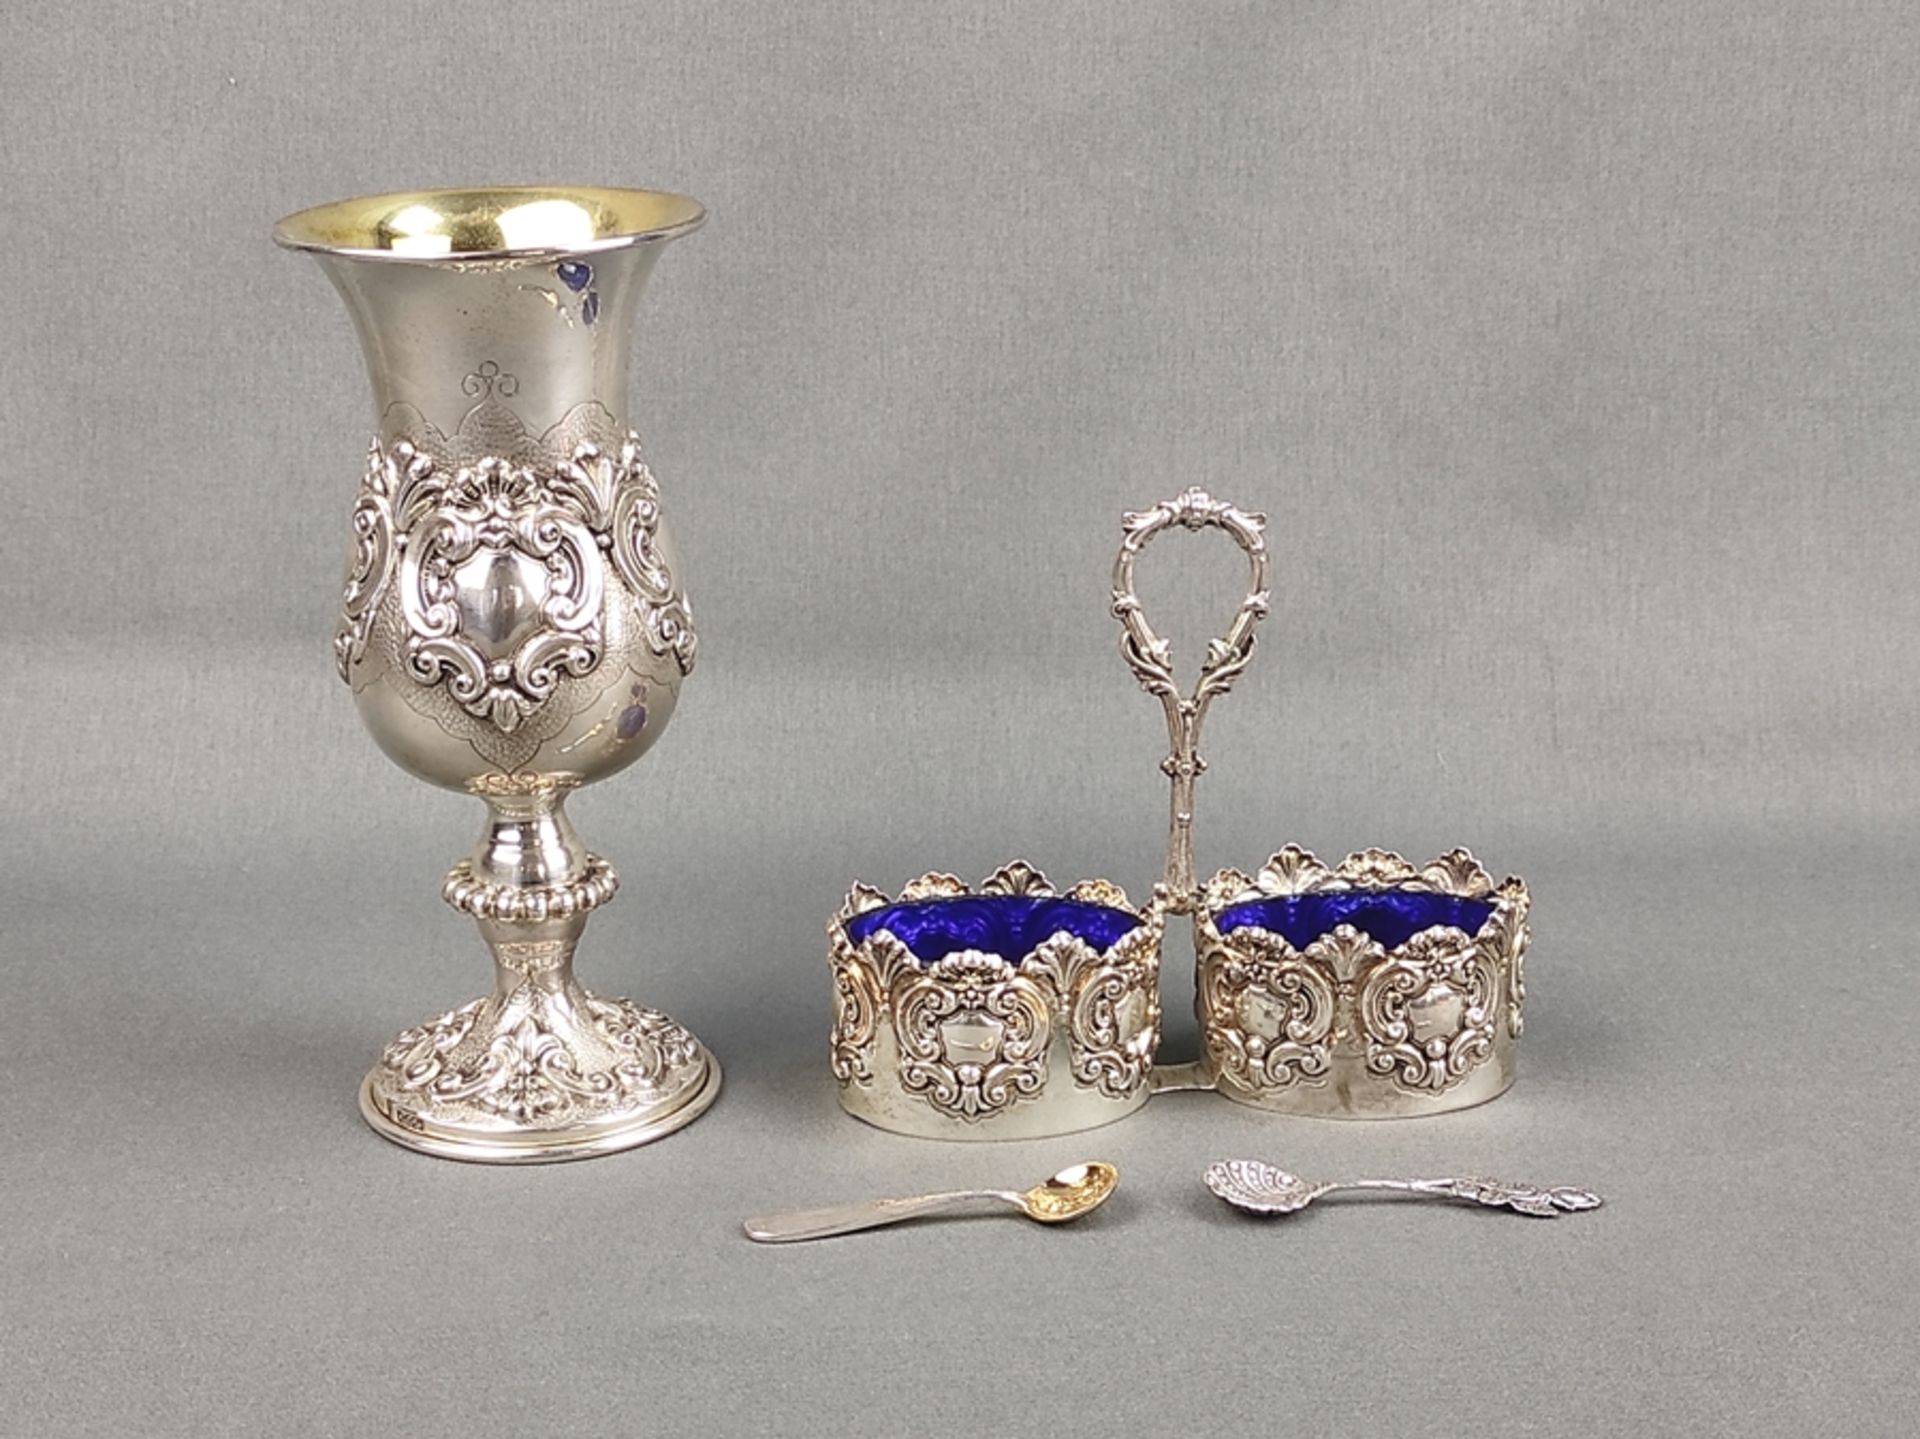 Two pieces of silver, consisting of: small goblet, 925 silver/sterling silver, master's mark FMT in